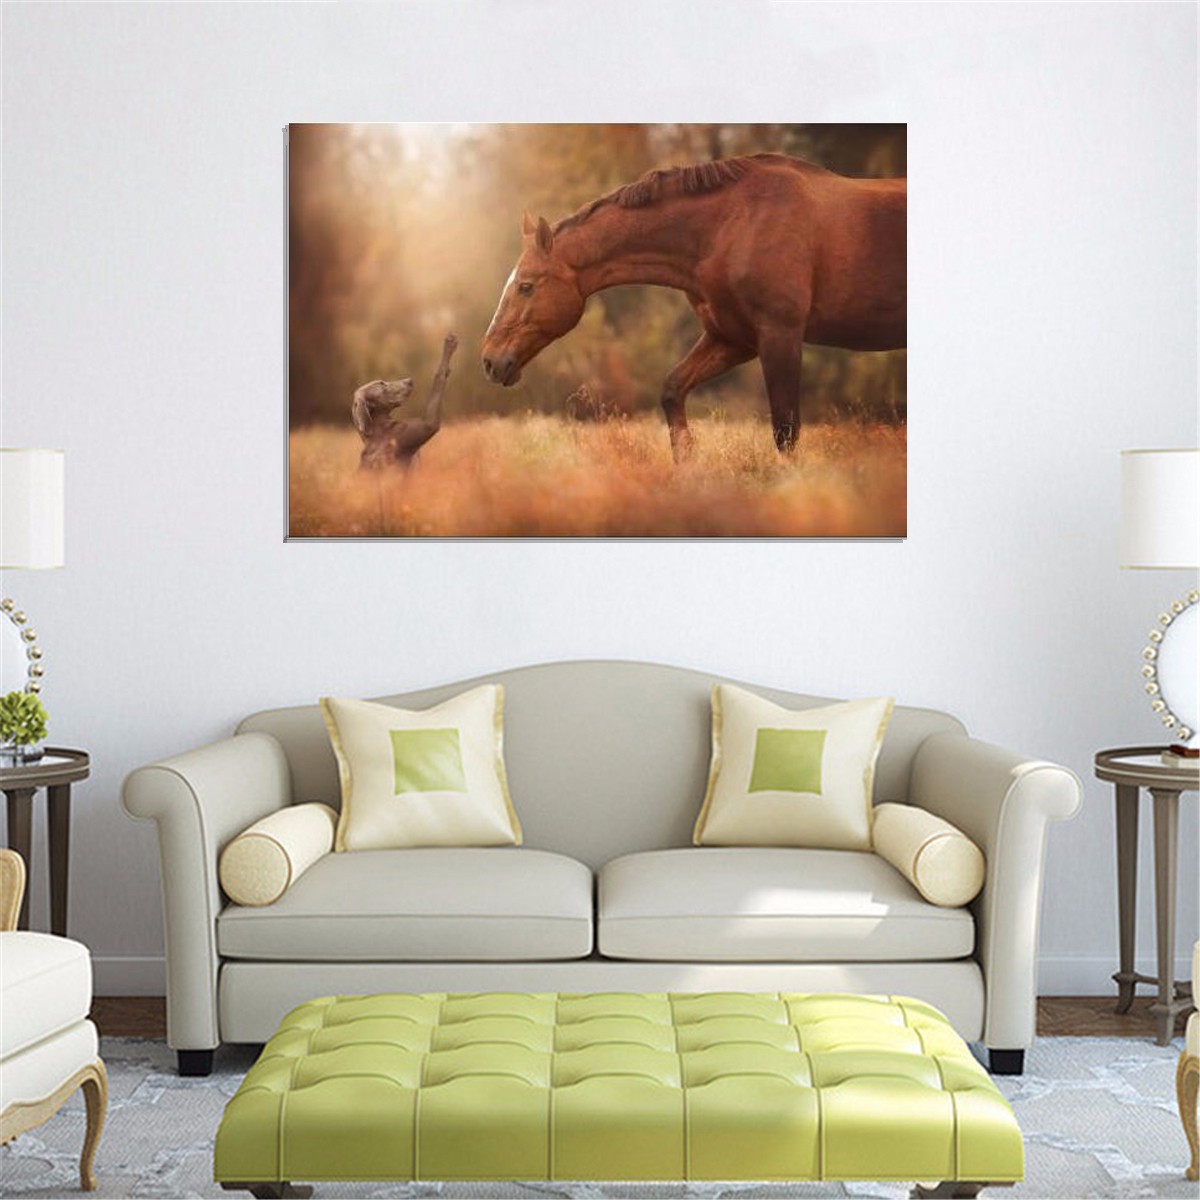 Friendship-of-Horse-and-Dog-Silk-Poster-Fabric-Nature-Animal-Print-Wall-Home-Decoration-1079143